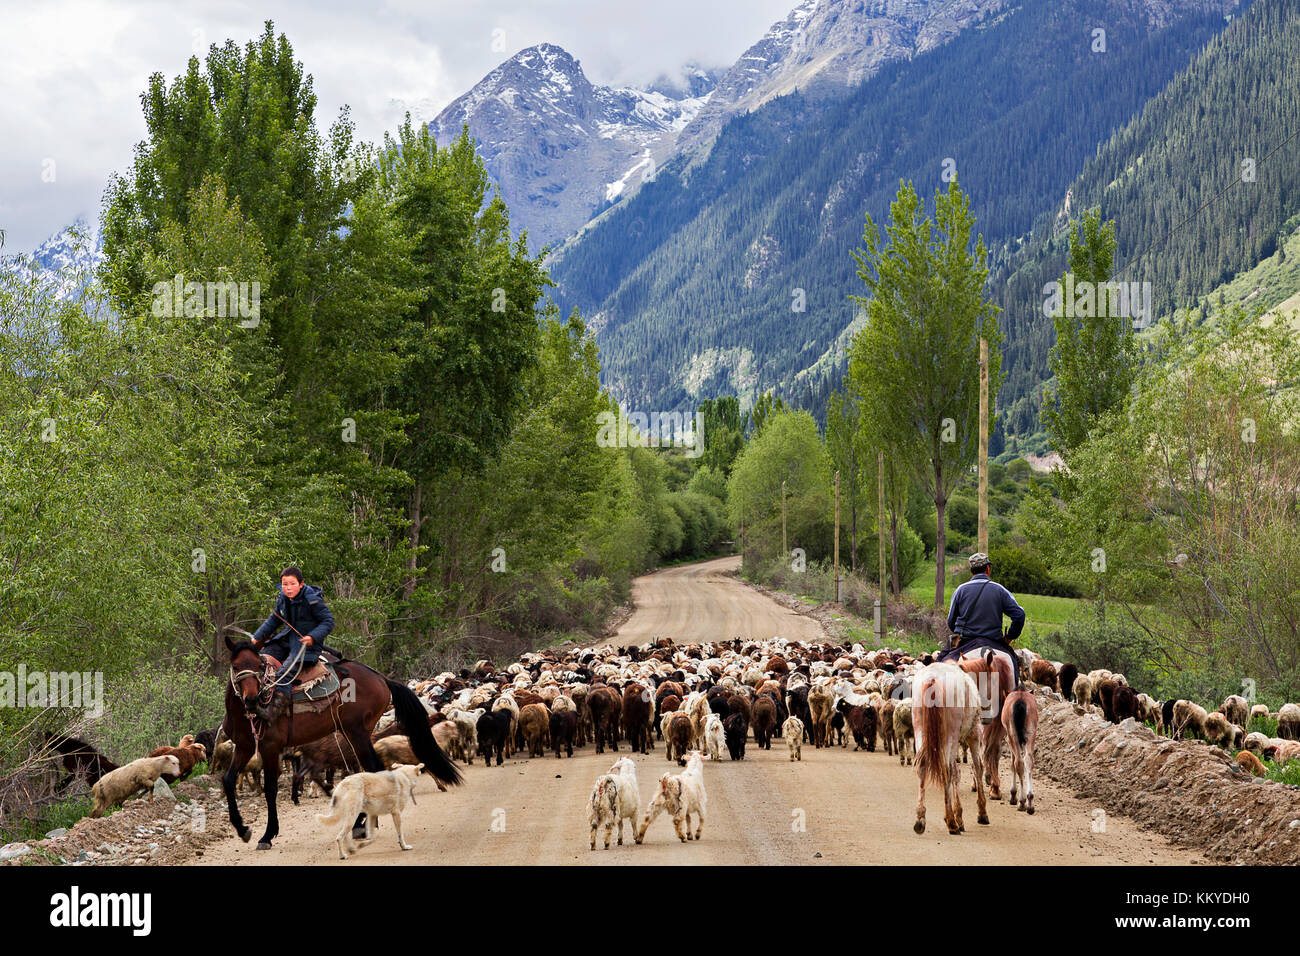 Kyrgyz herders getting their sheep and goats to high plateaus through the road in the Barskaun Gorge, Kyrgyzstan Stock Photo